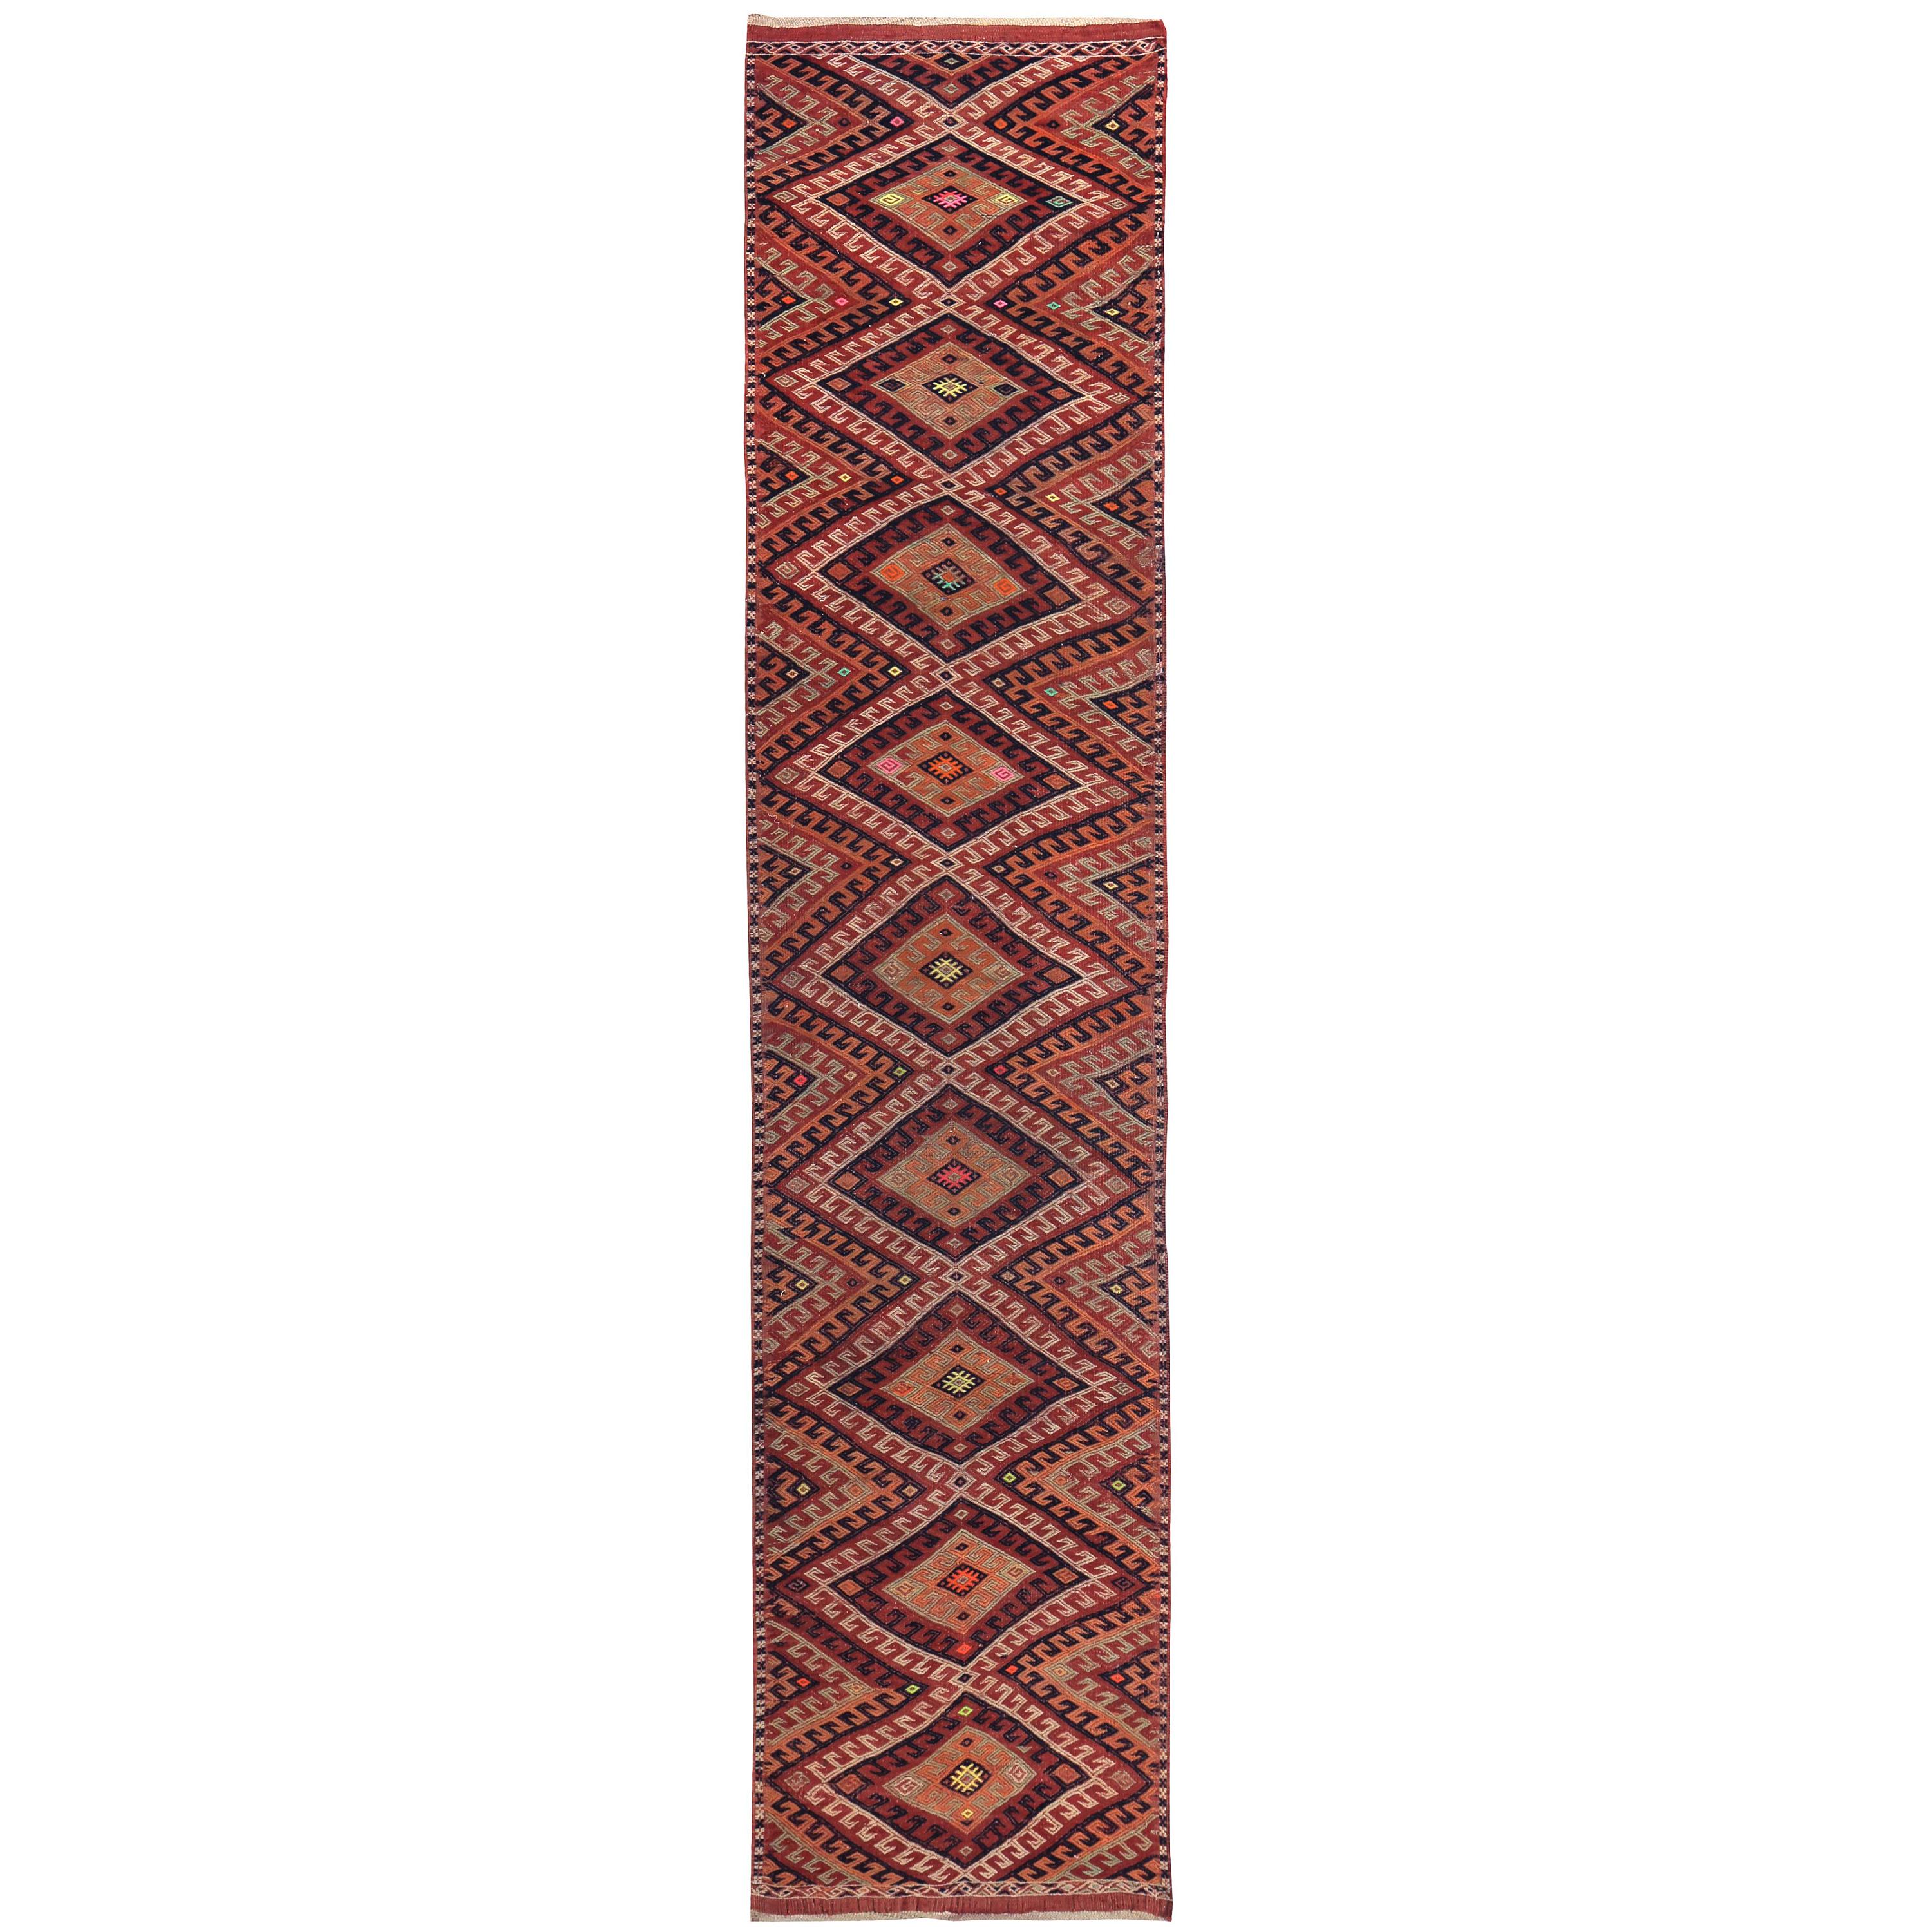 Turkish Kilim Runner Rug with Red, Orange and Ivory Tribal Design For Sale